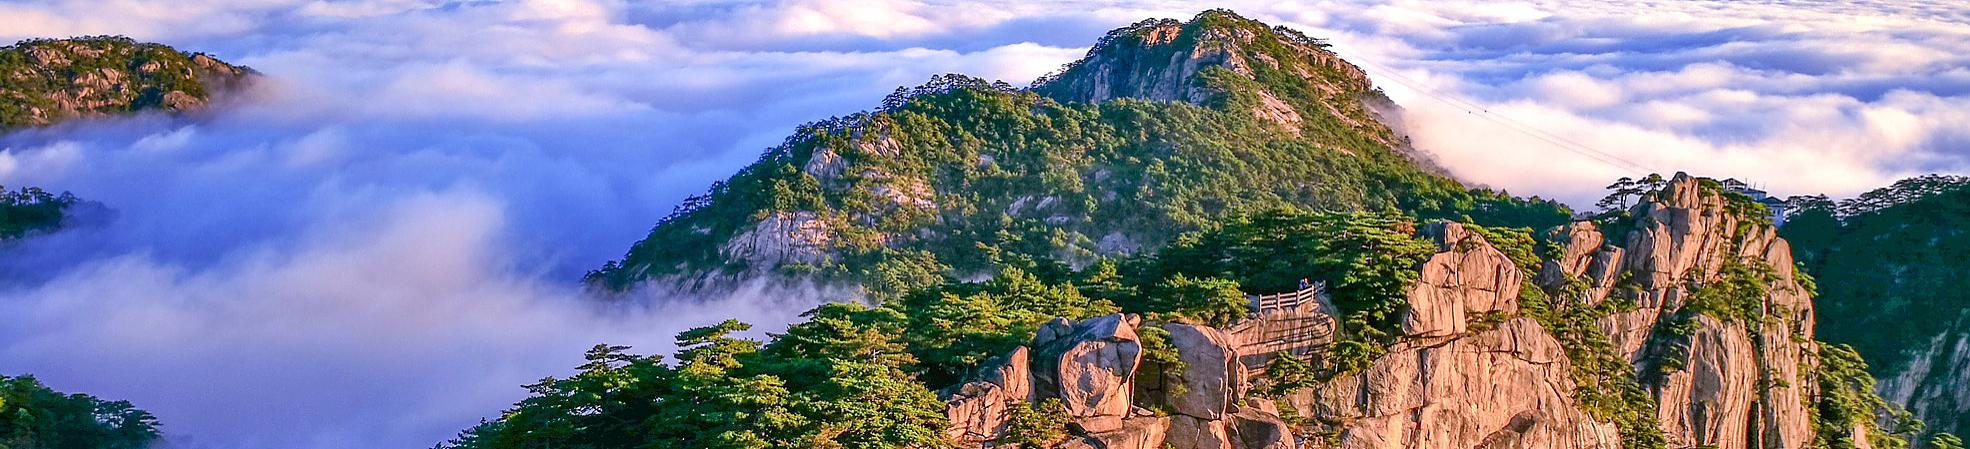 Huangshan Notes on Travel Tips